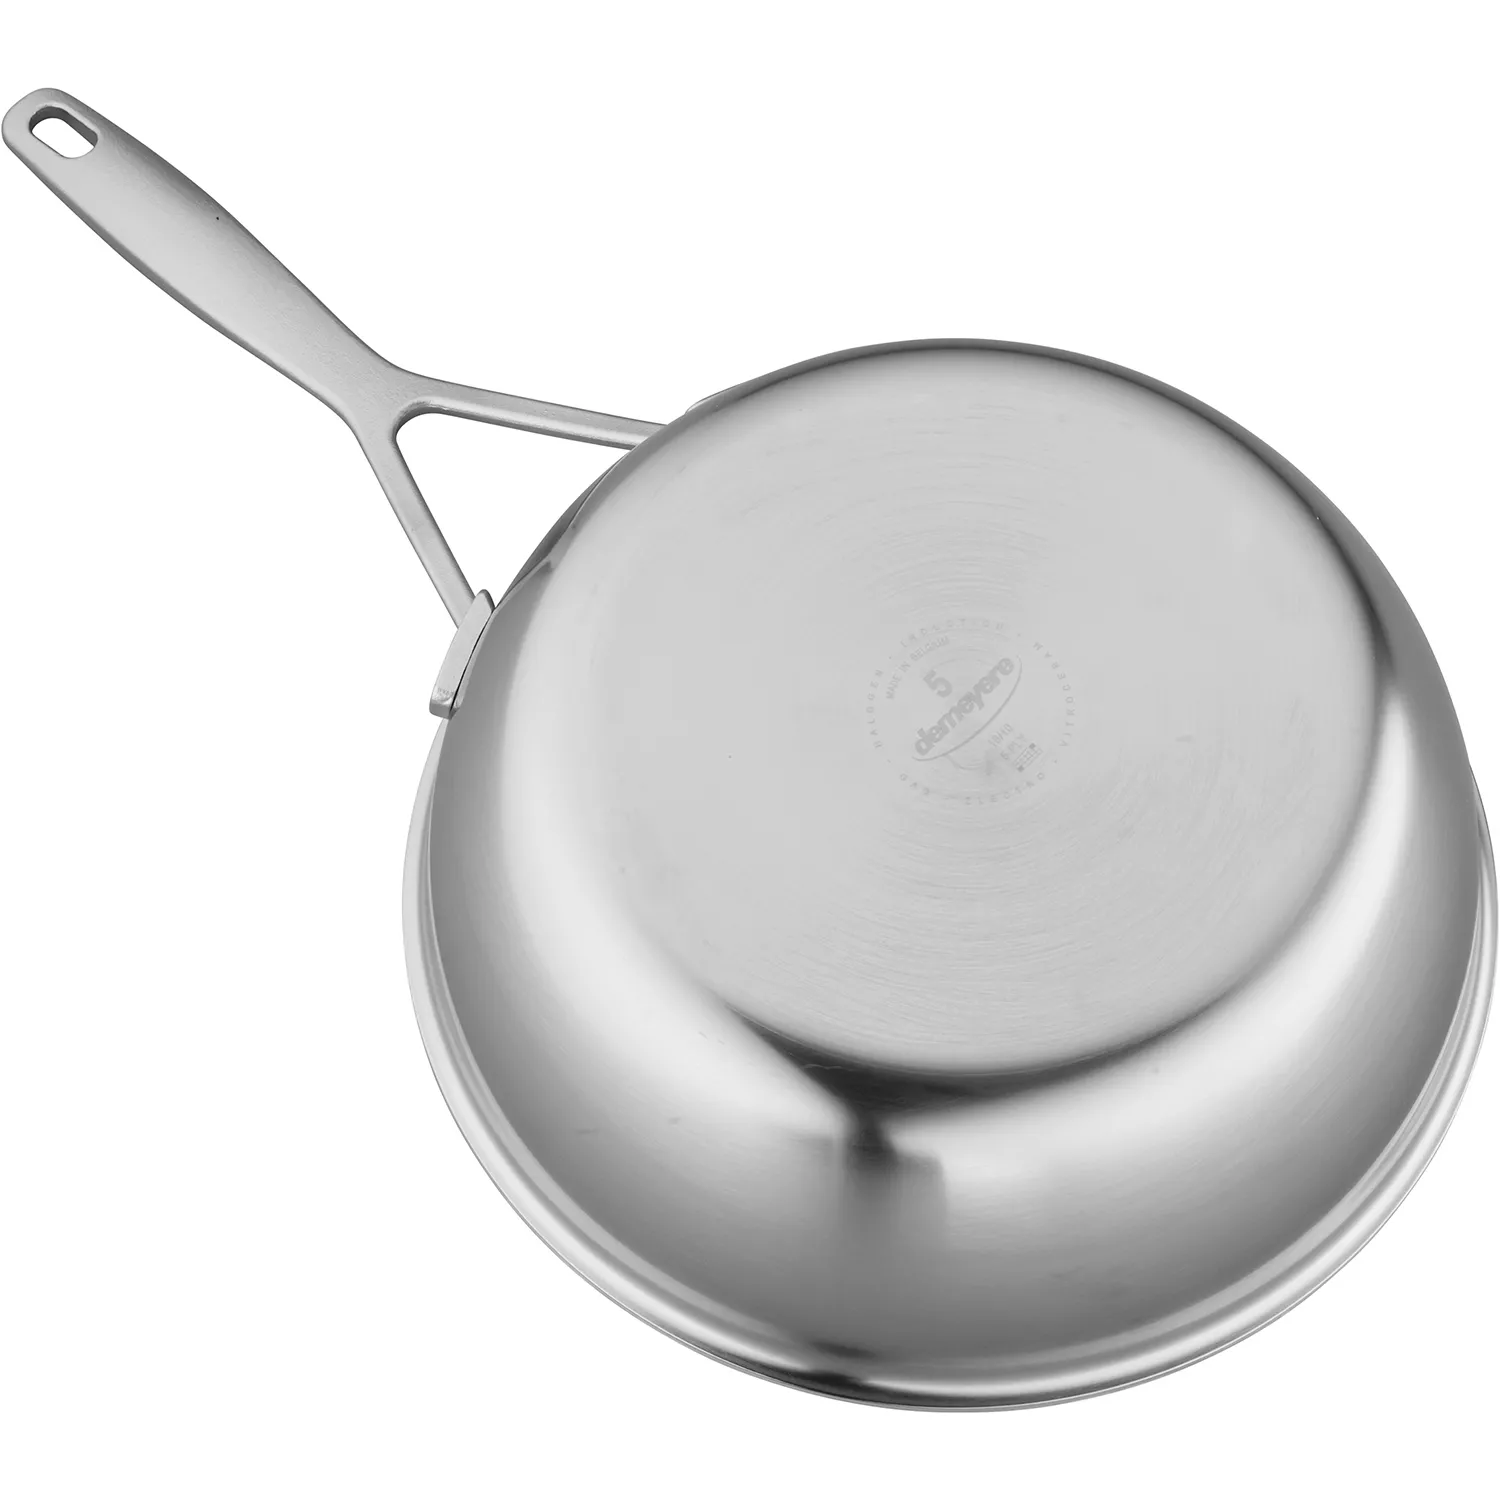 Demeyere Industry5 Stainless Steel Essential Pan, 3.5 Qt.